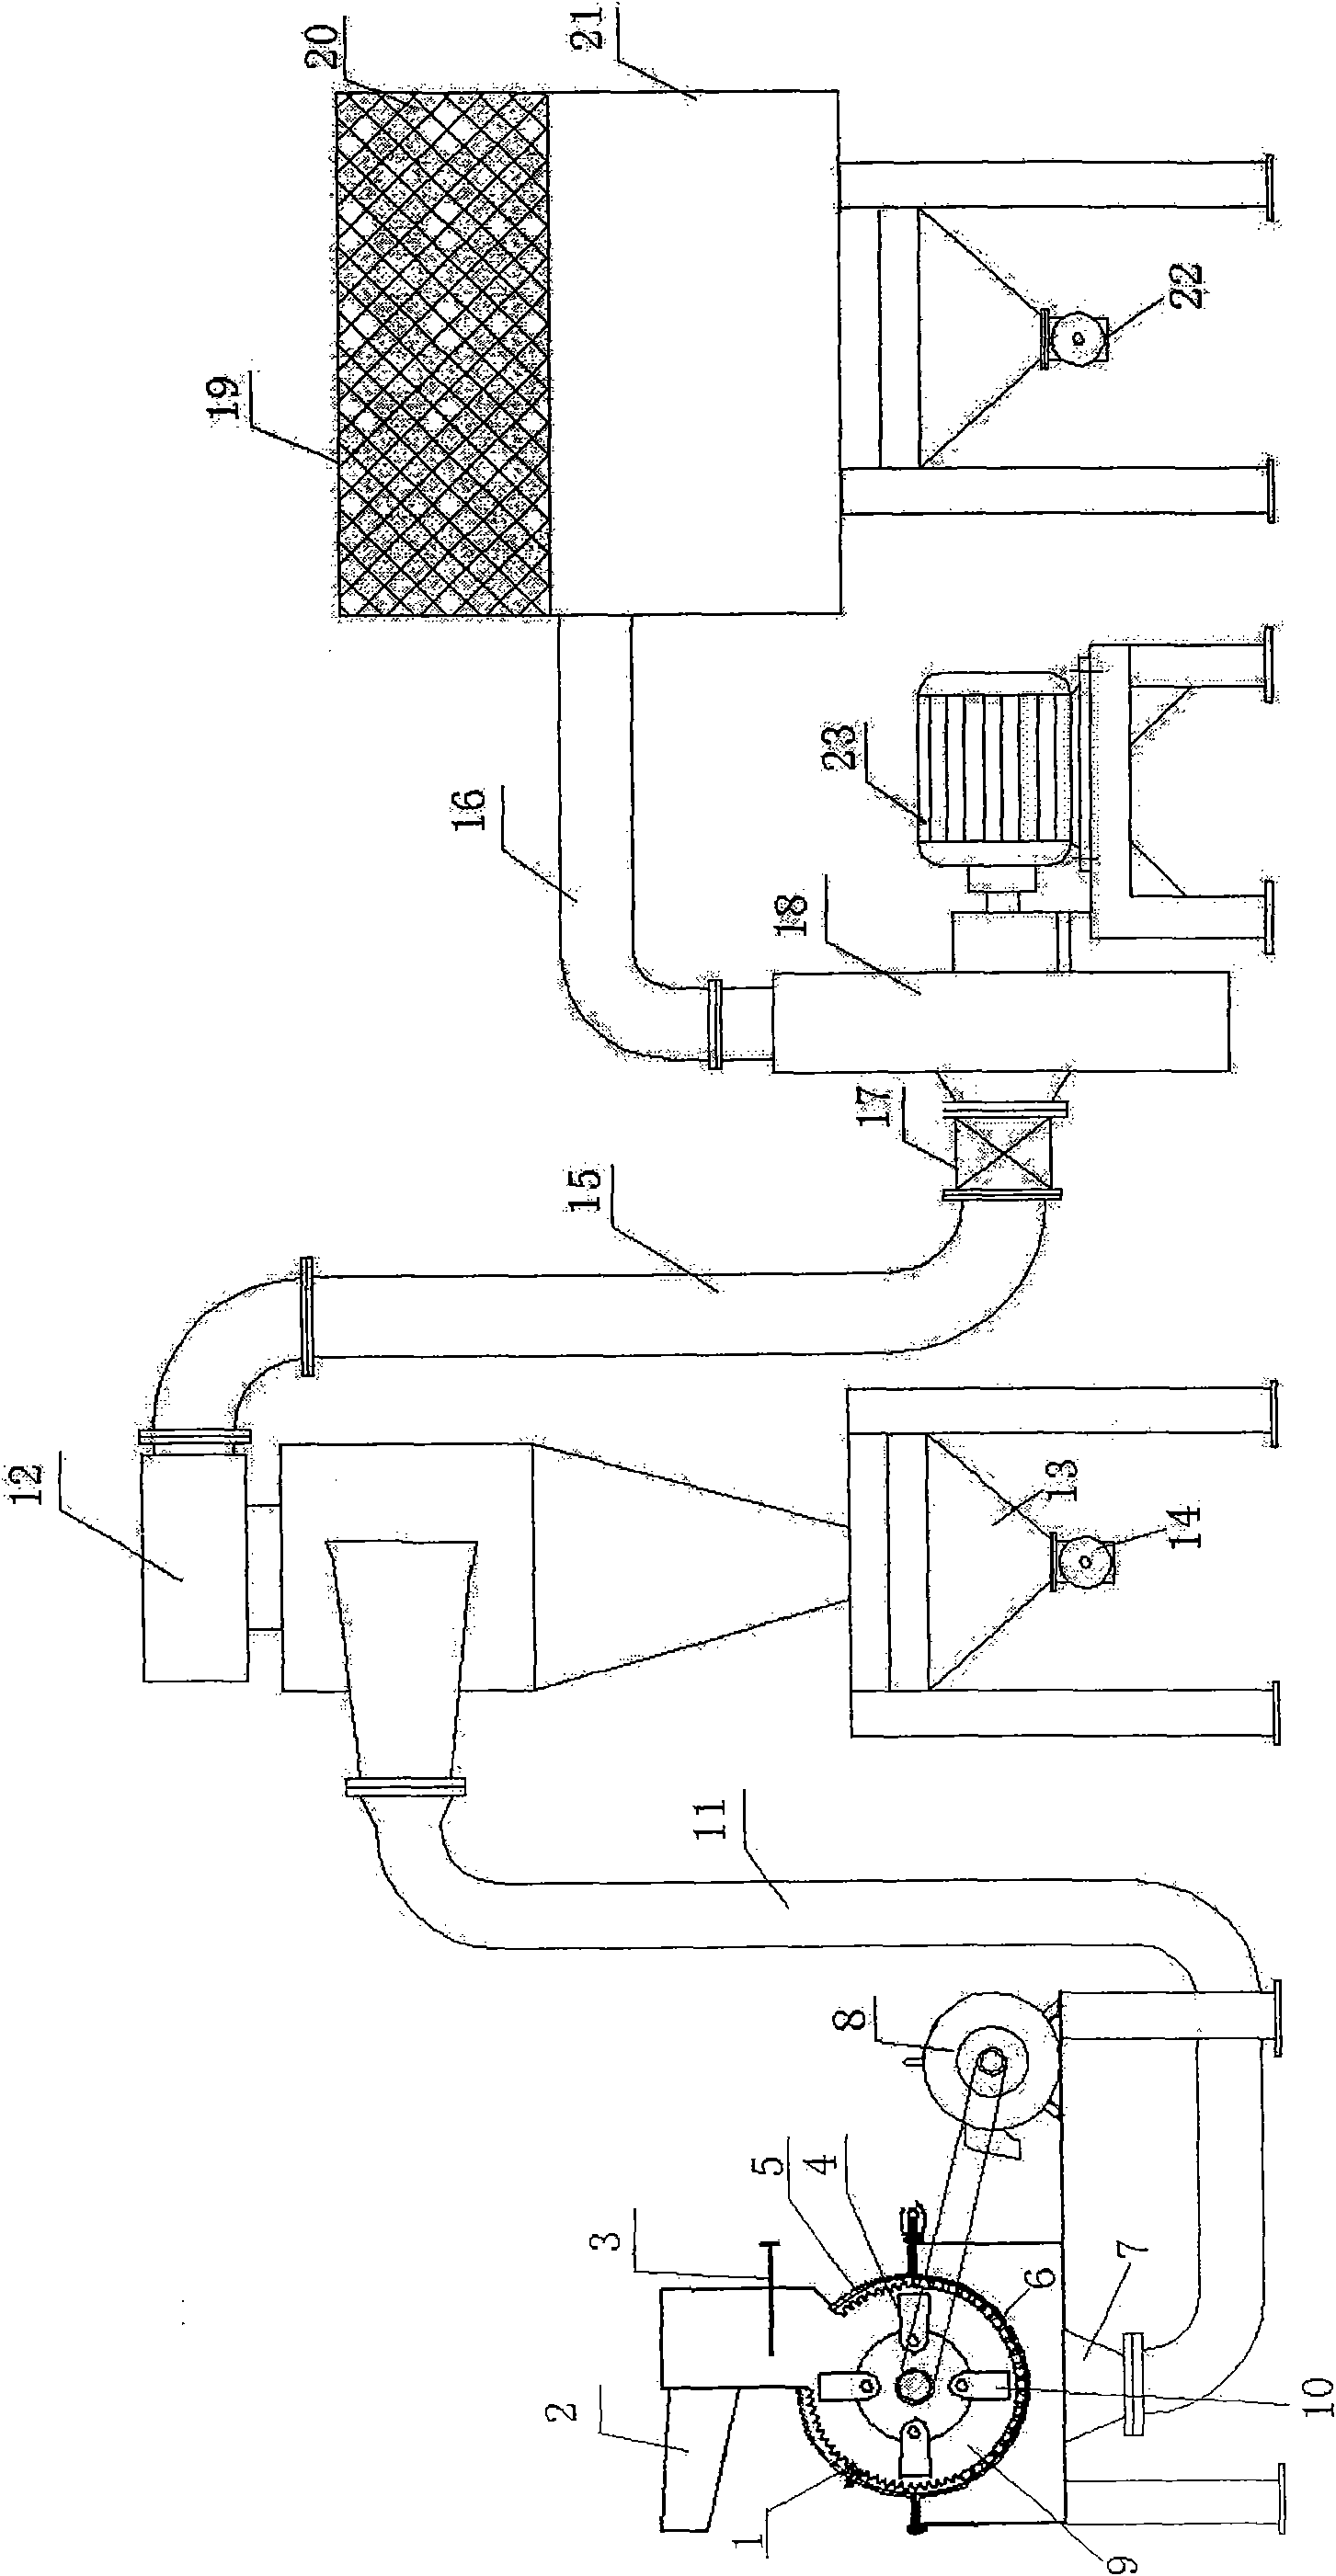 Method and equipment of aluminum capacitor disassembly and resource recovery